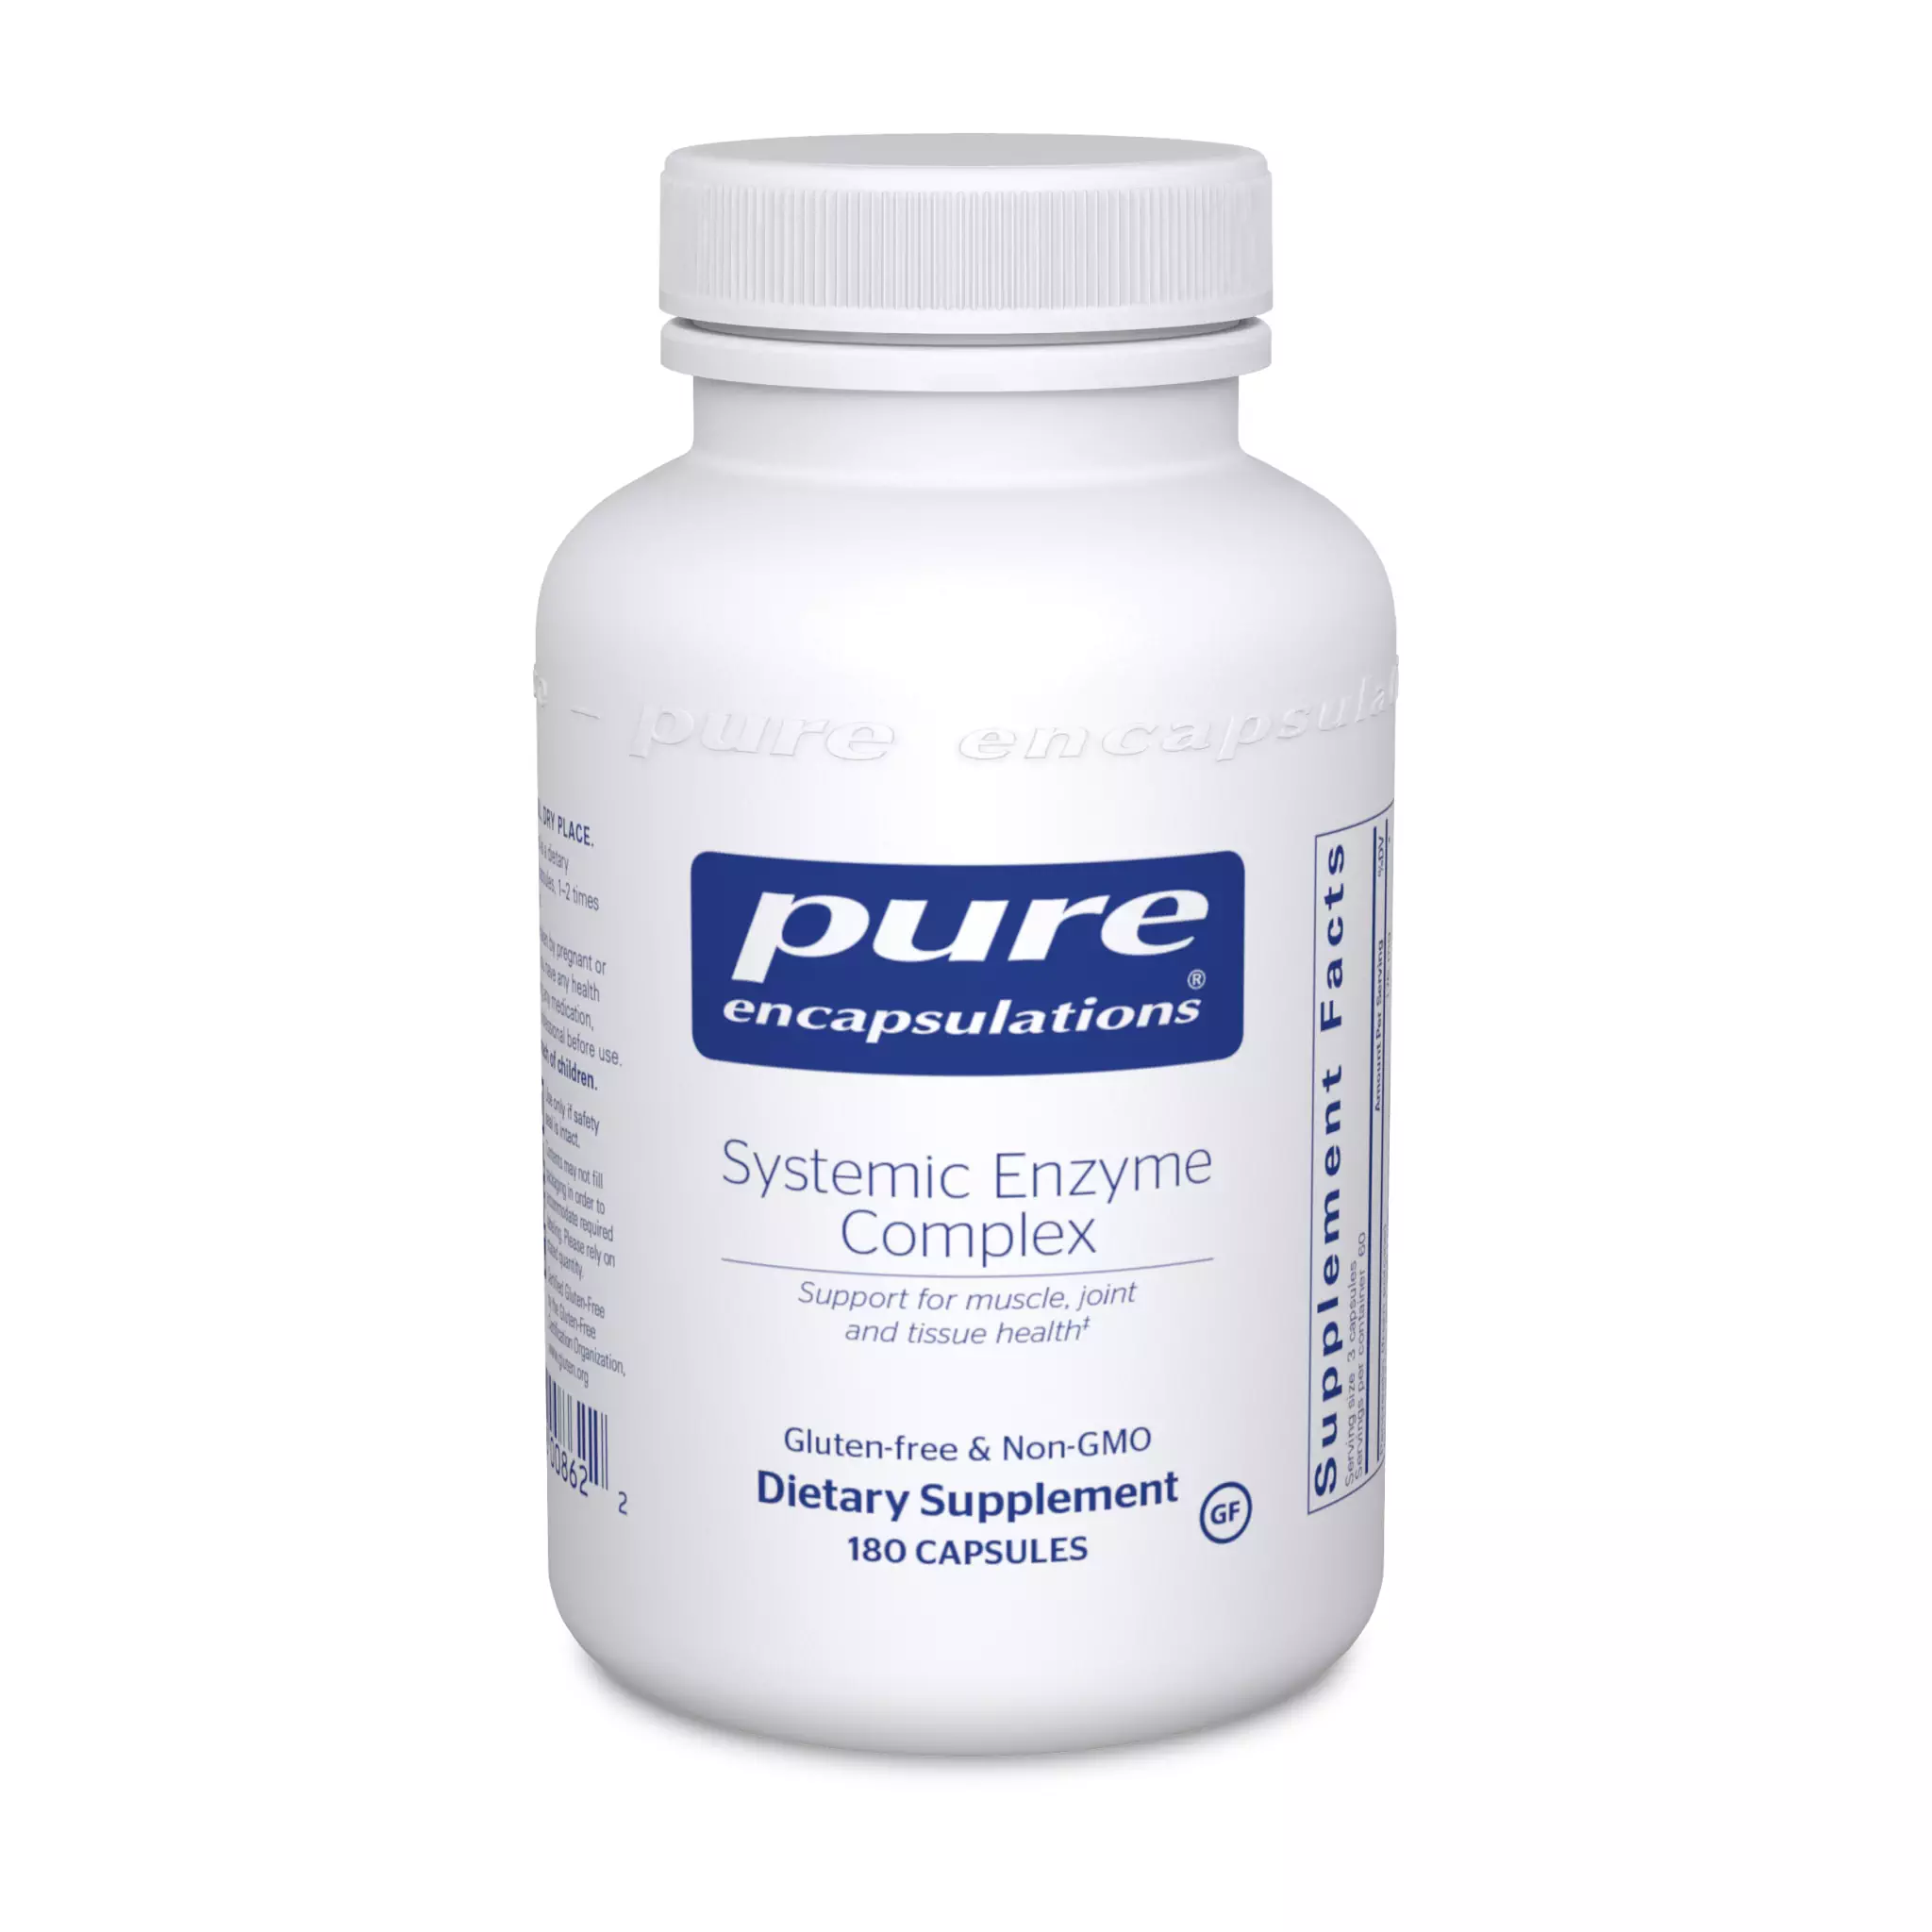 Pure Encapsulations - Systemic Enzyme Complex